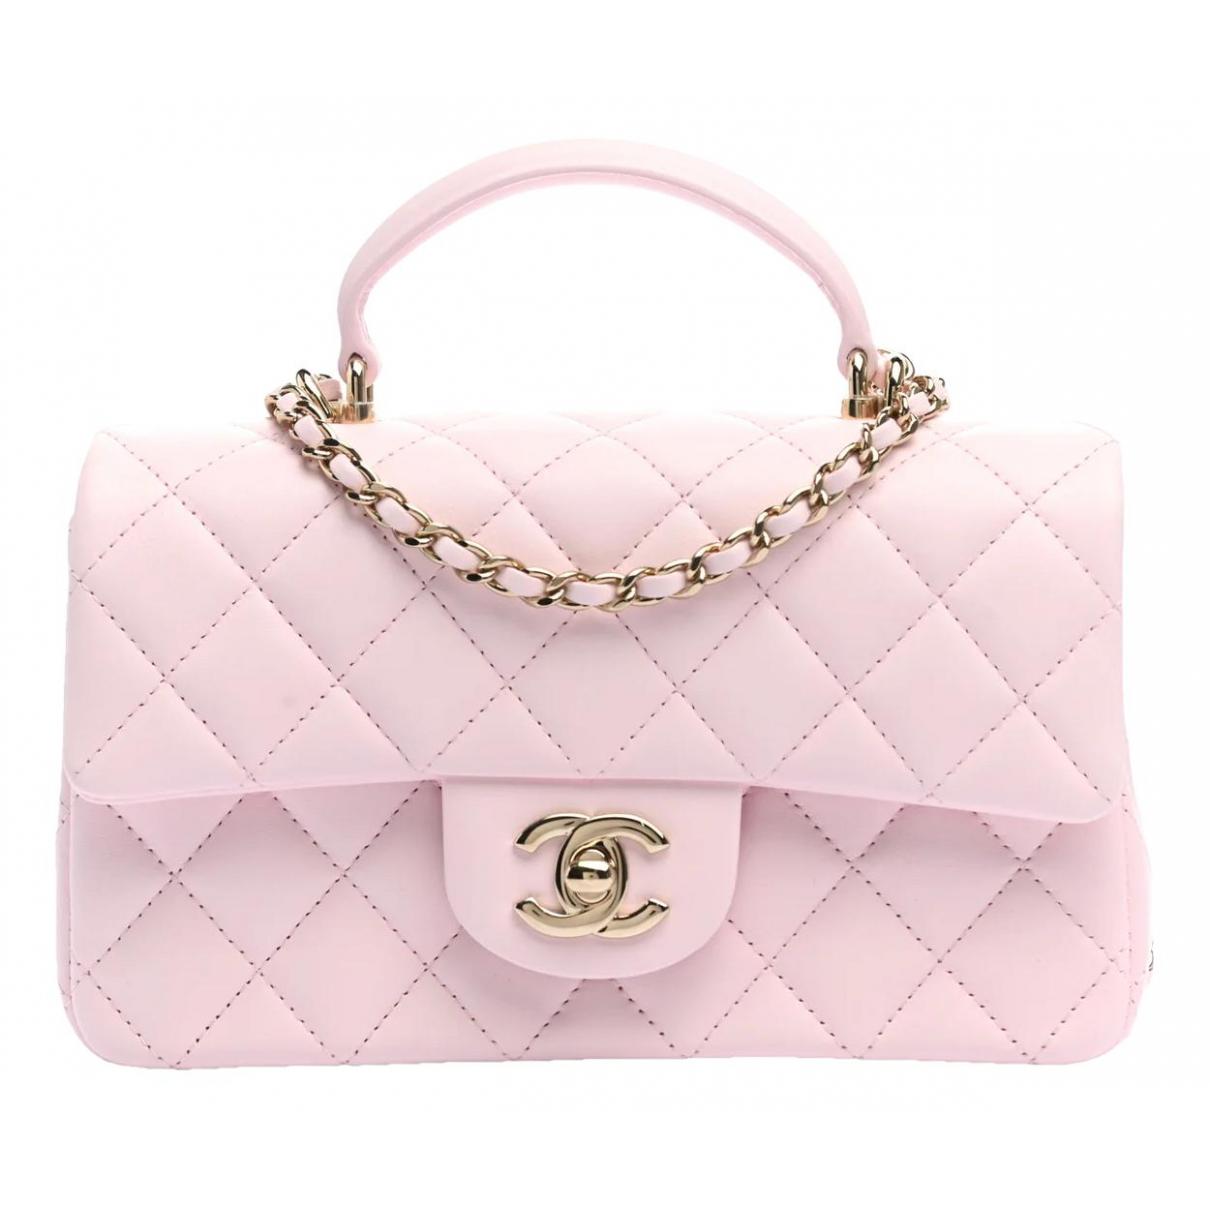 MY PINK CHANEL BAG COLLECTION 💖 *40 CHANEL BAGS!* ALL THE